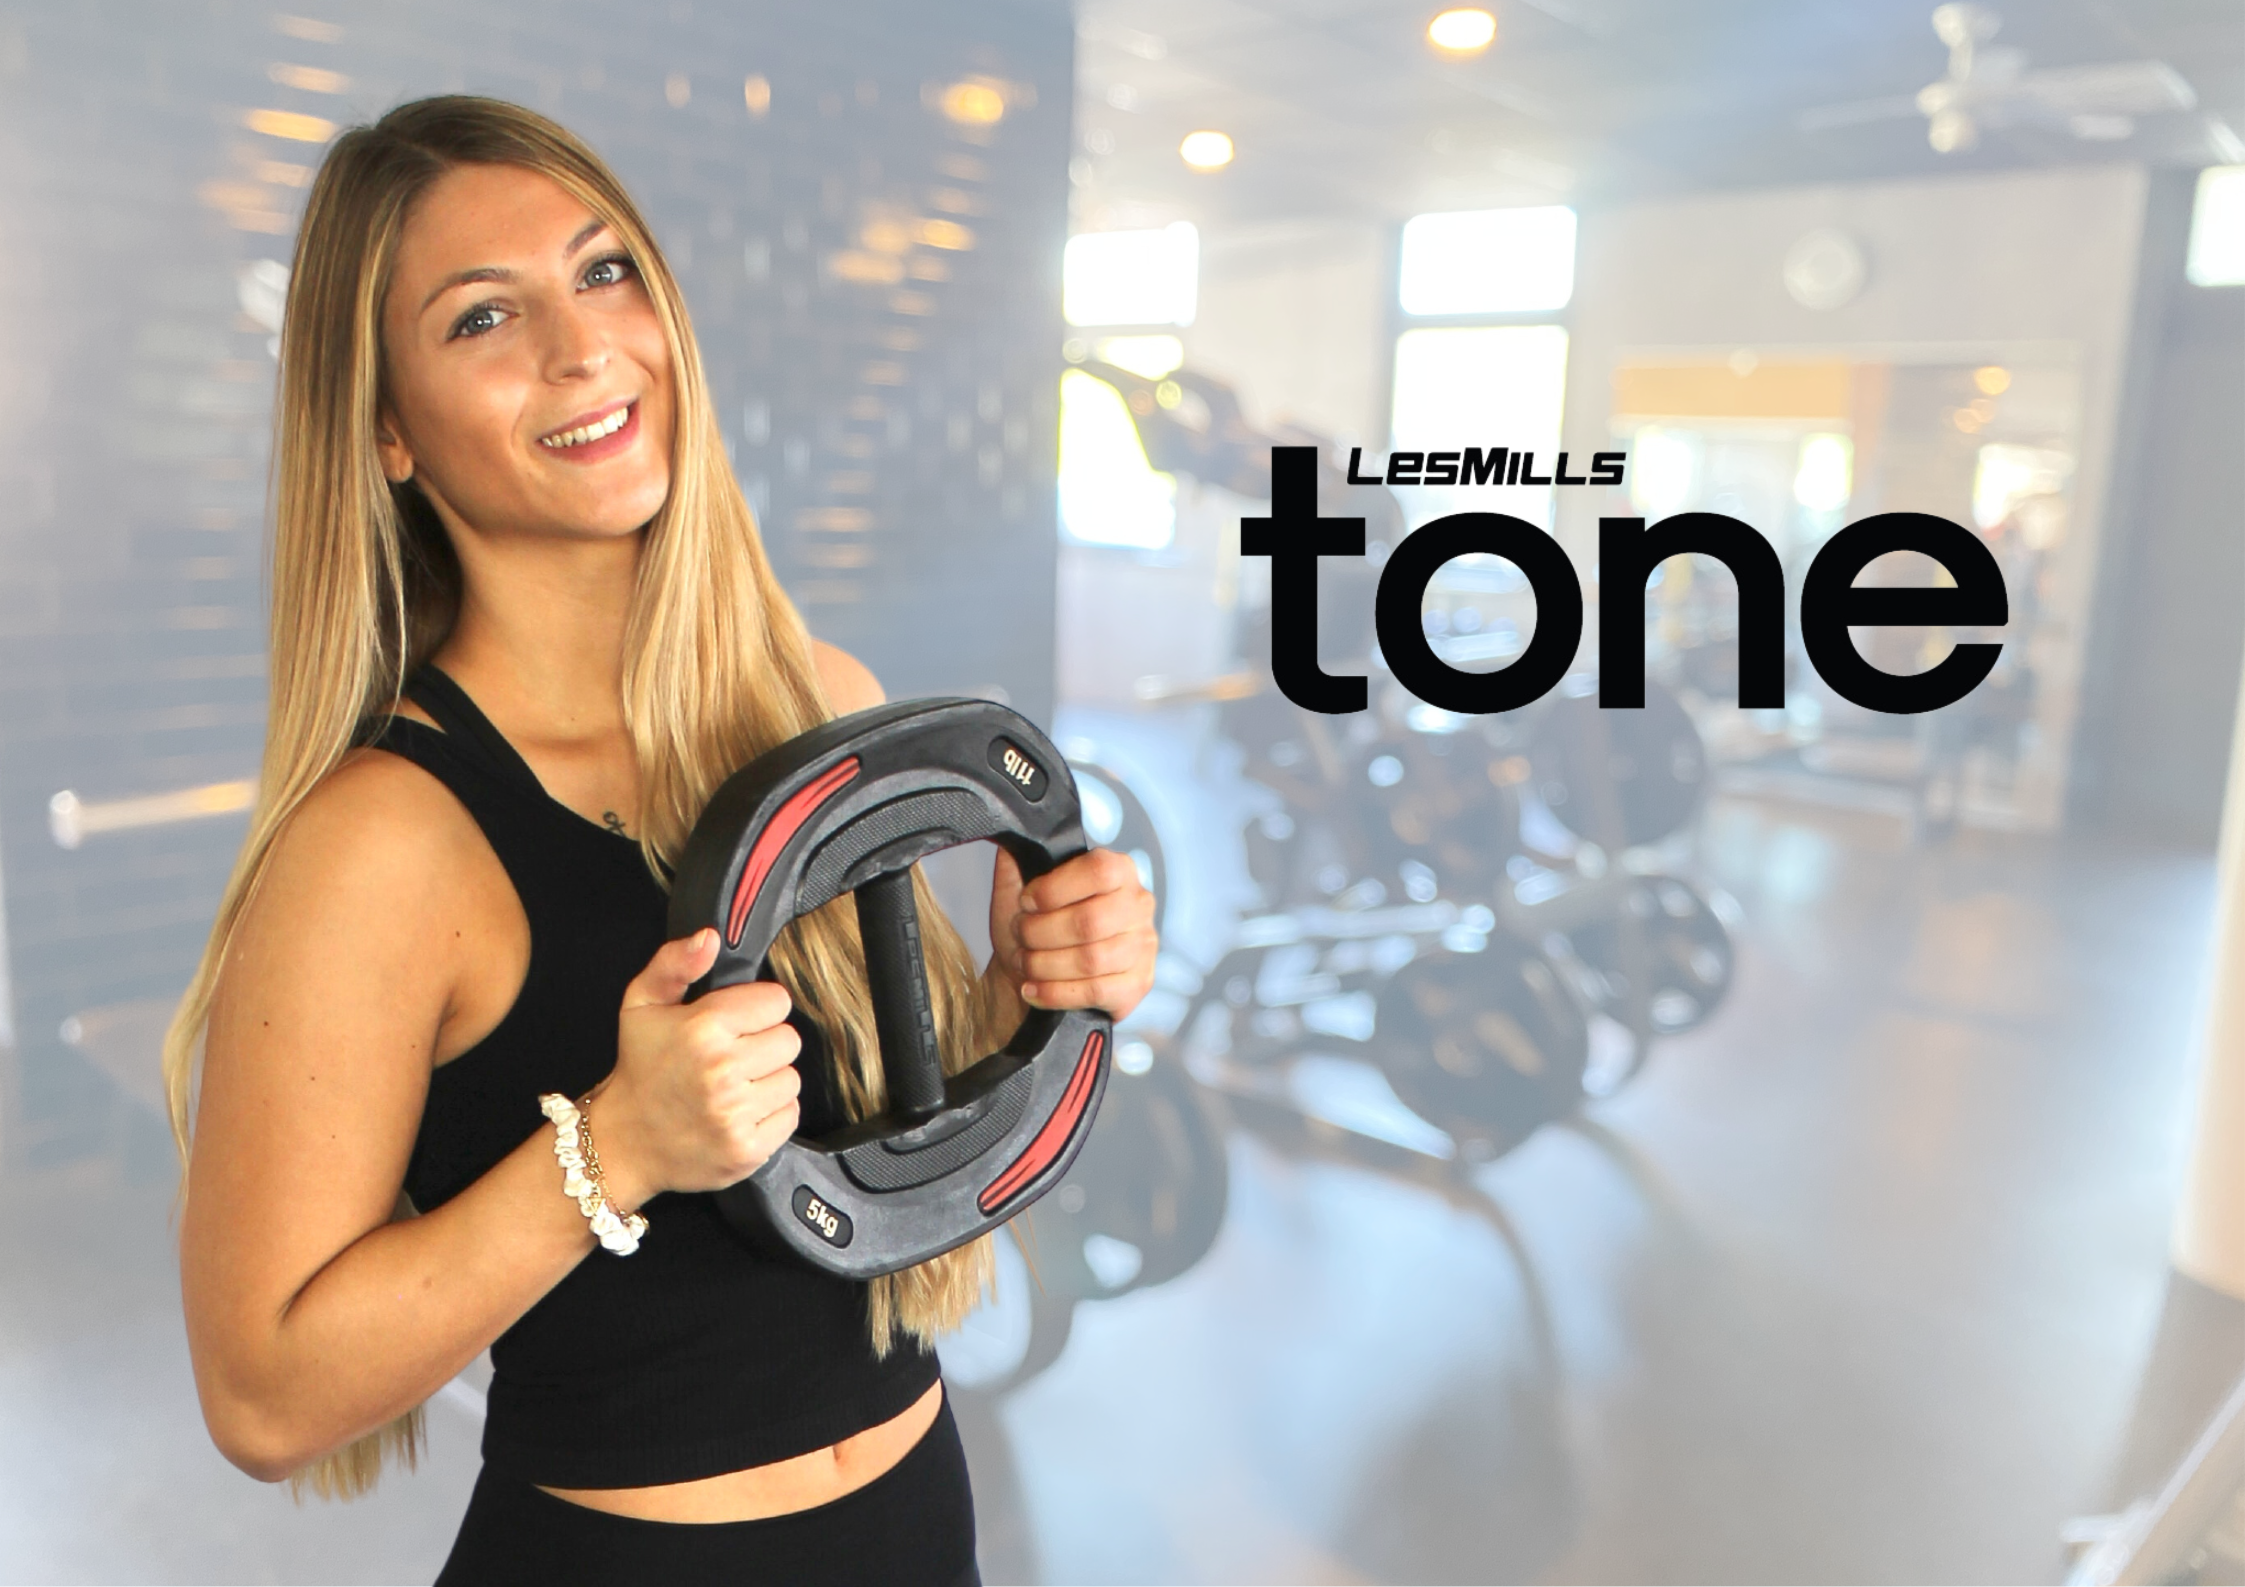 Full Body Workout (Les Mills Tone)